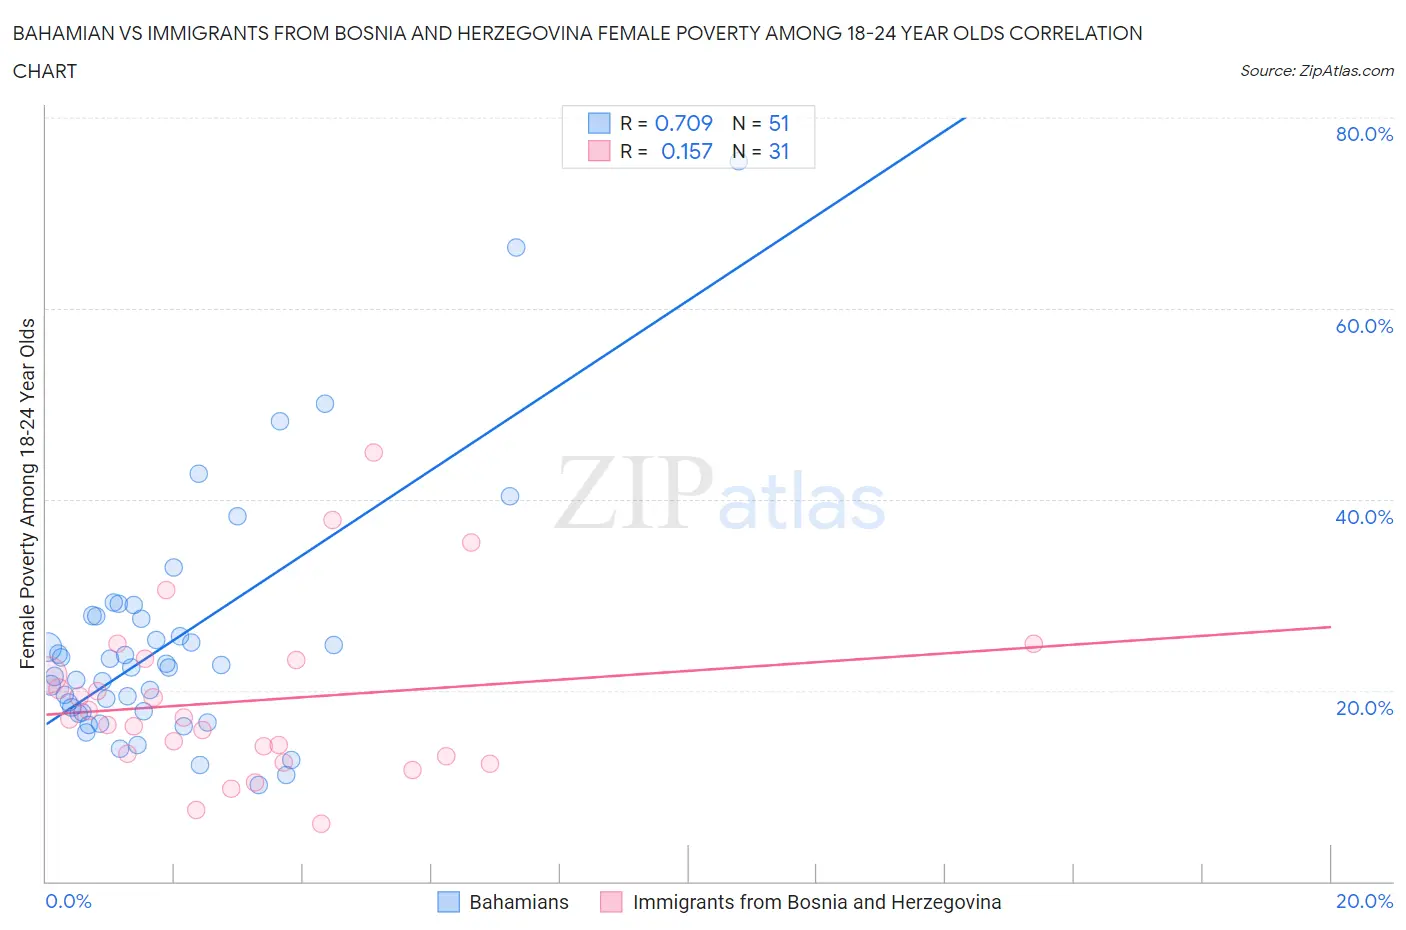 Bahamian vs Immigrants from Bosnia and Herzegovina Female Poverty Among 18-24 Year Olds